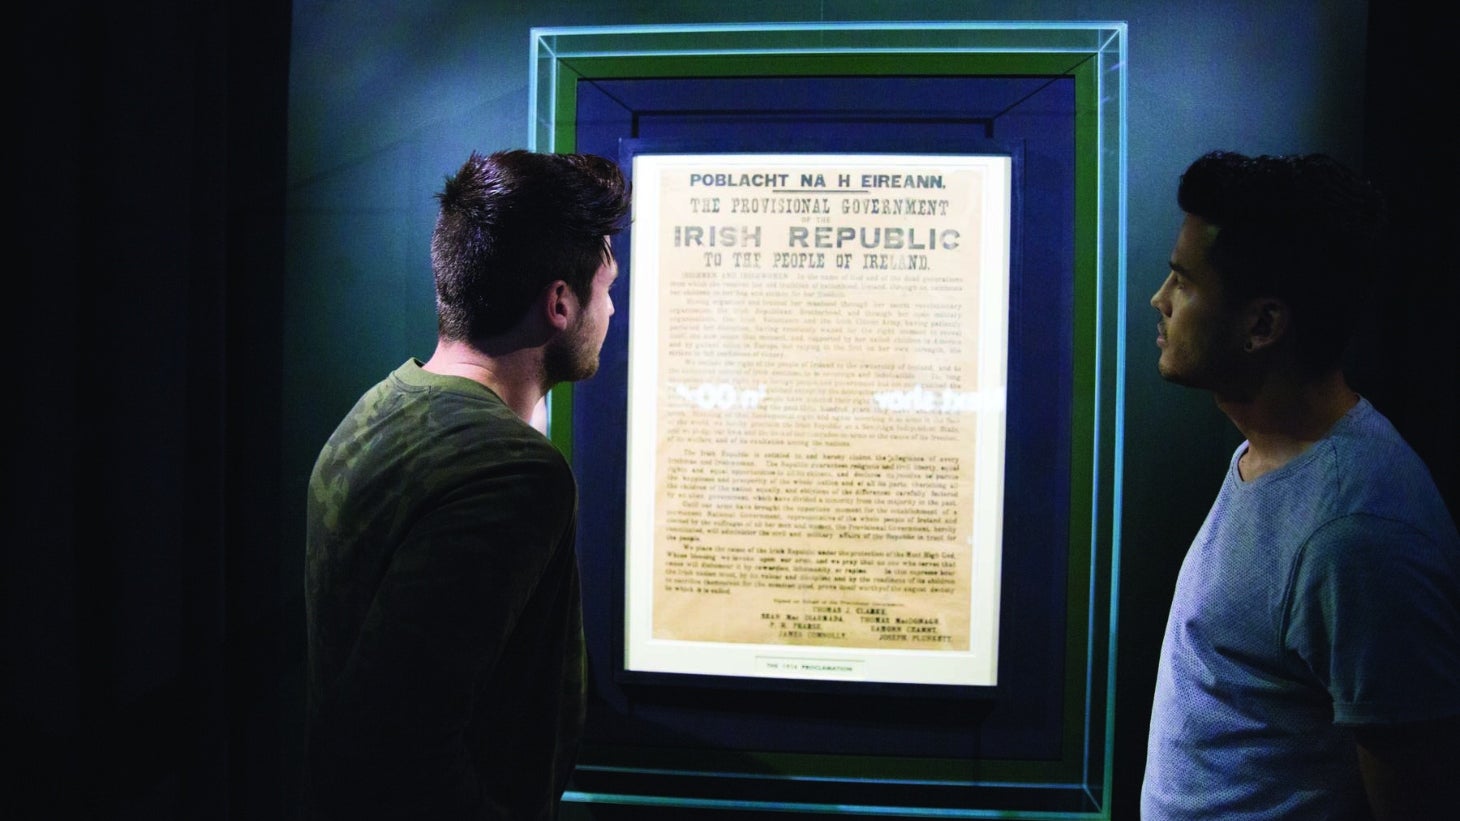 1916 Proclamation Exhibit at the GPO Witness History Exhibition, O'Connell Street Lower, Dublin 1